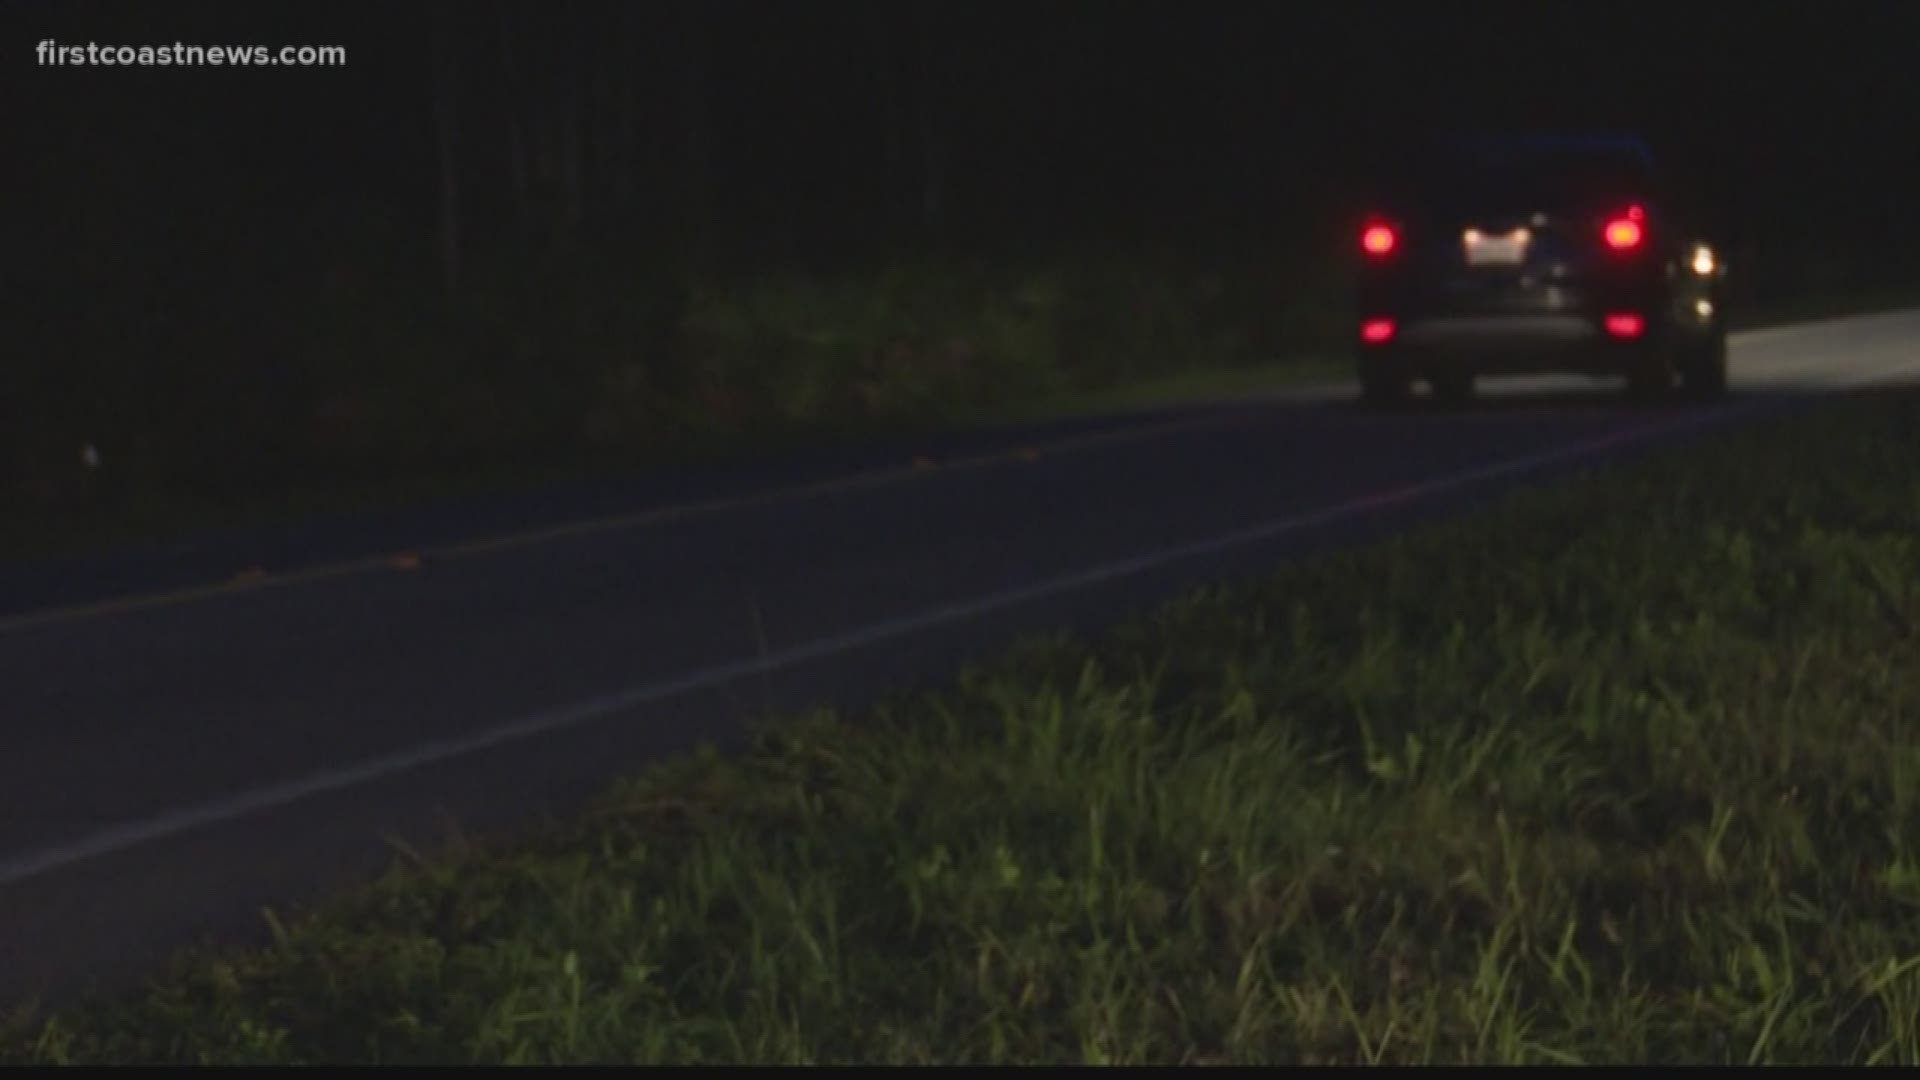 Deputies said a dark-colored mid-size sedan driven by a man with an orange shirt hit bicyclists traveling along Racetrack Road near Bartram Springs Parkway.